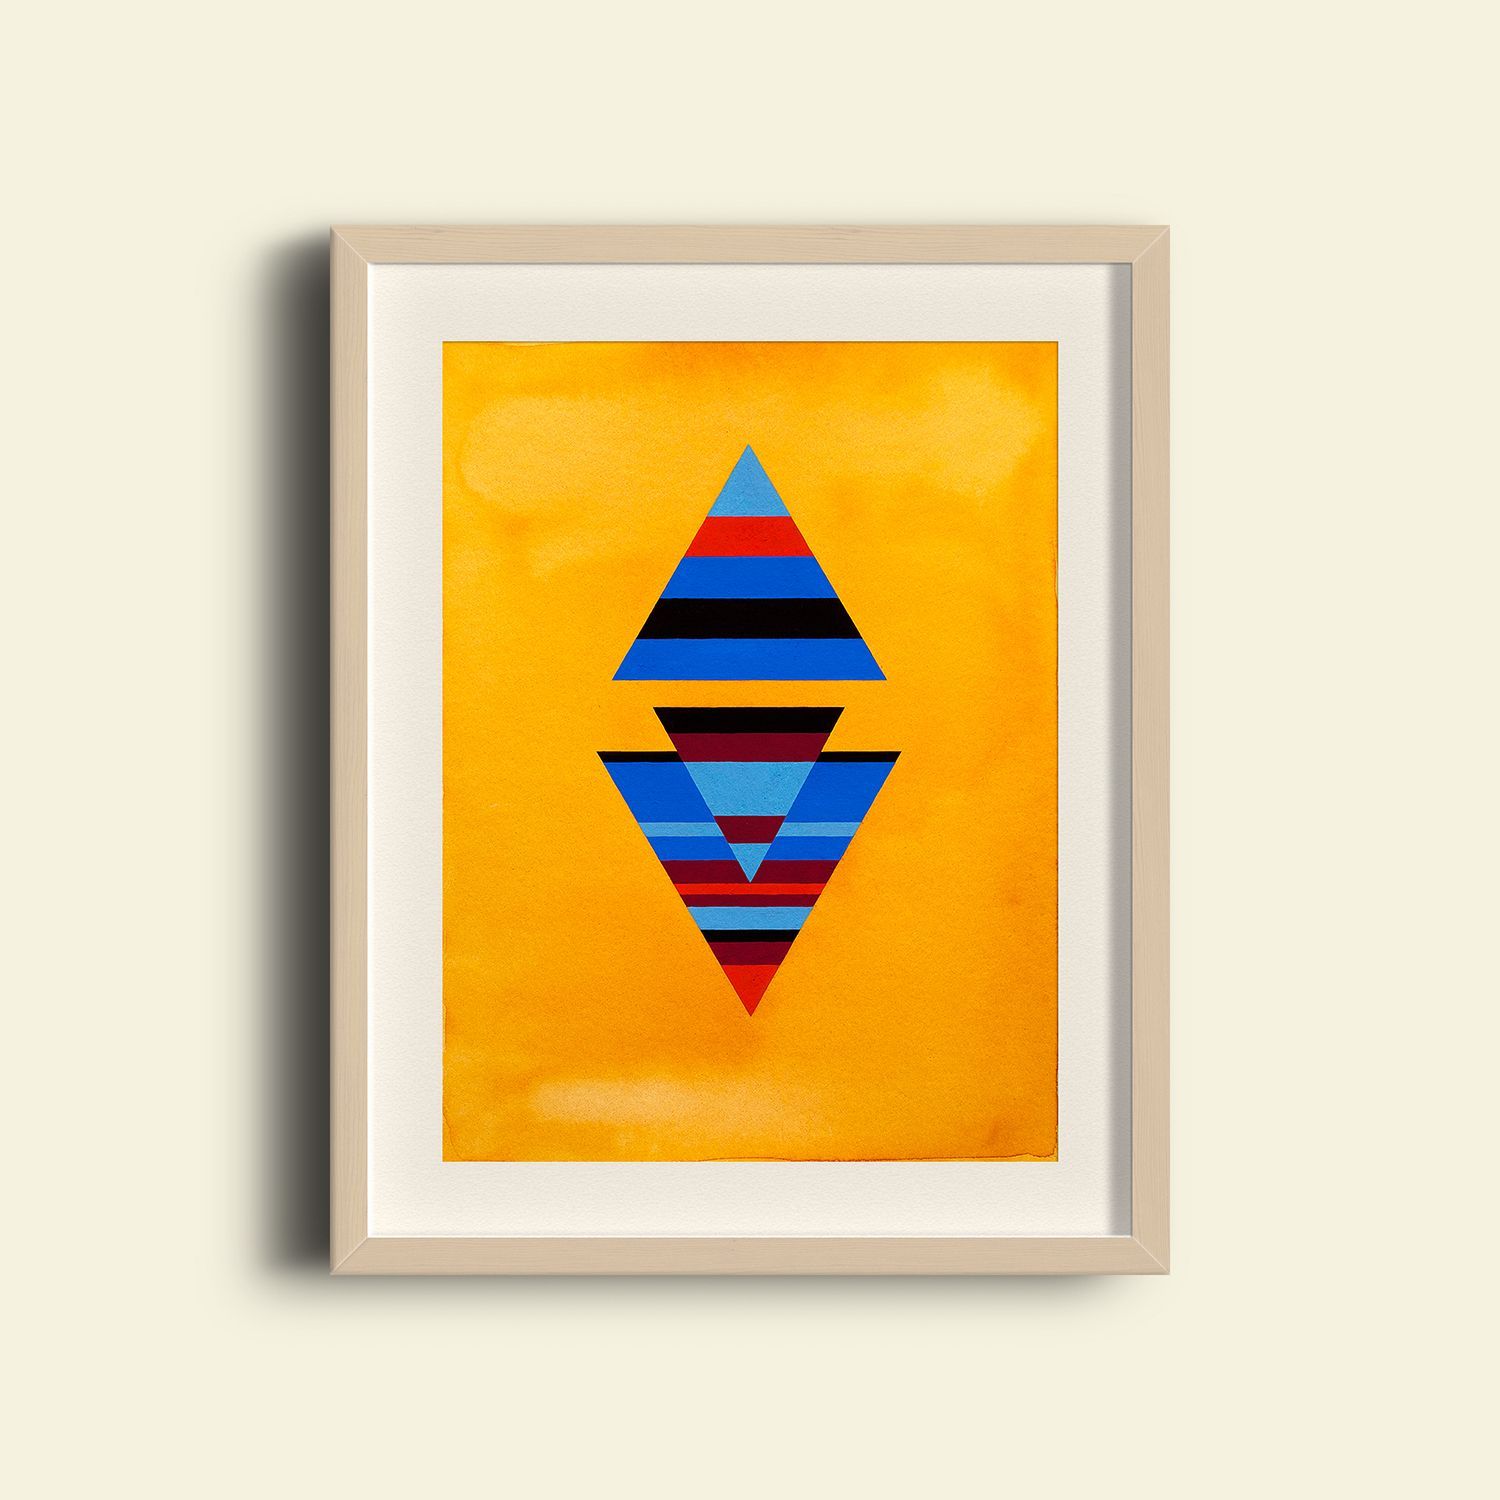 Pyramid Reflections Ii | Original Painting Design, Framed Throughout Most Recent Pyrimids Wall Art (View 13 of 20)